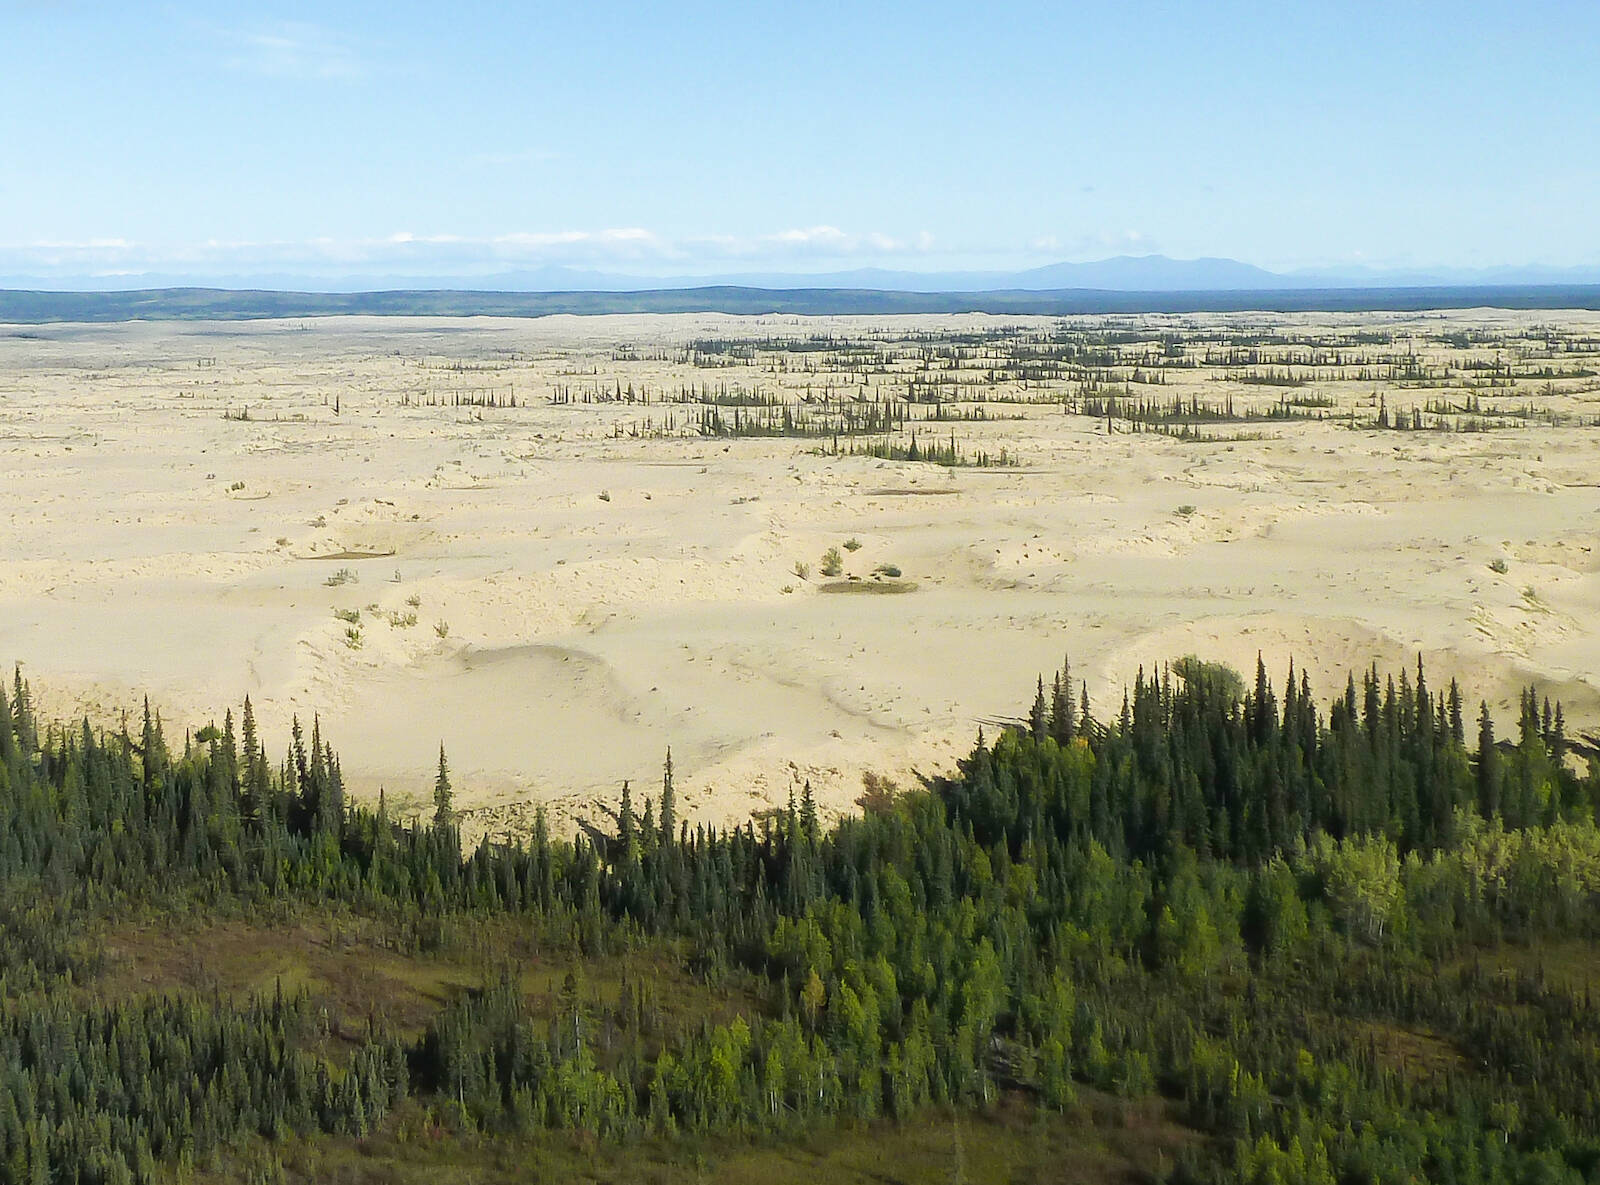 Pale sand dunes stretch out beyond a line of spruce trees in Koyukuk National Wildlife Refuge. Thousands of years ago, sand exposed by receding glaciers drifted into large dunes against the Nulato Hills, known today as the Nogabahara Sand Dunes. (Courtesy Photo / Keith Ramos,USFWS)